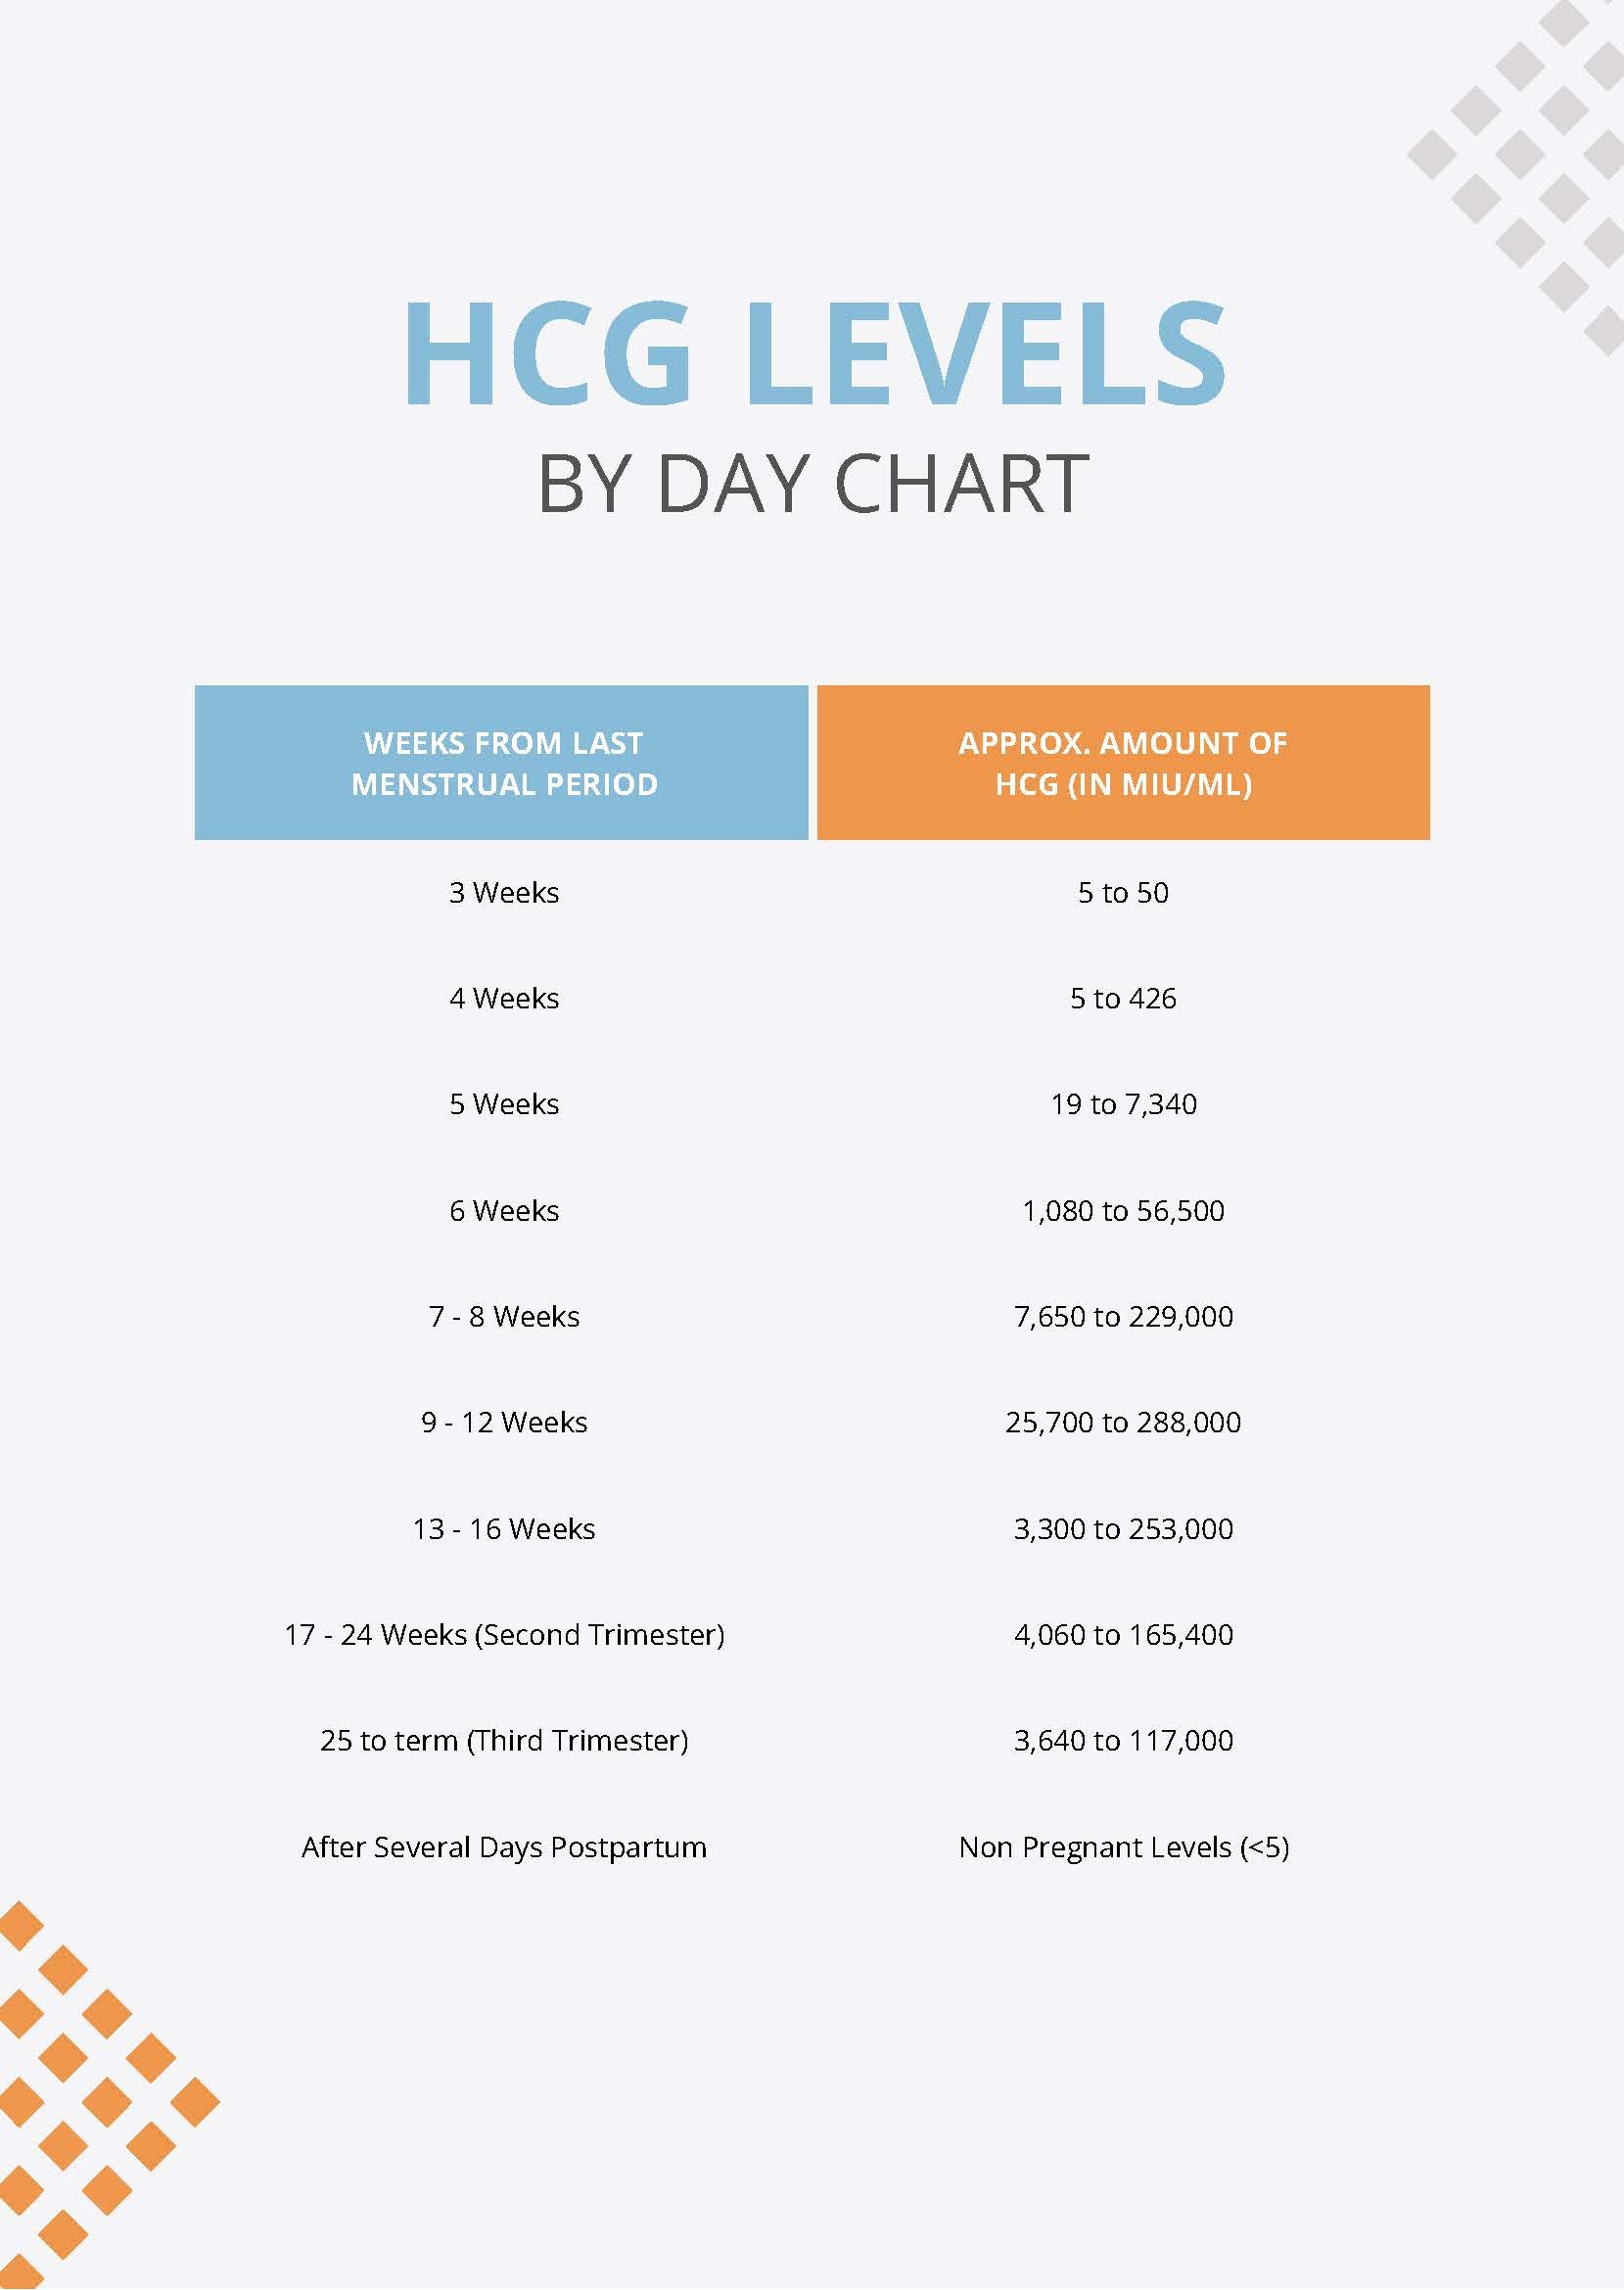 HCG Levels By Day Chart